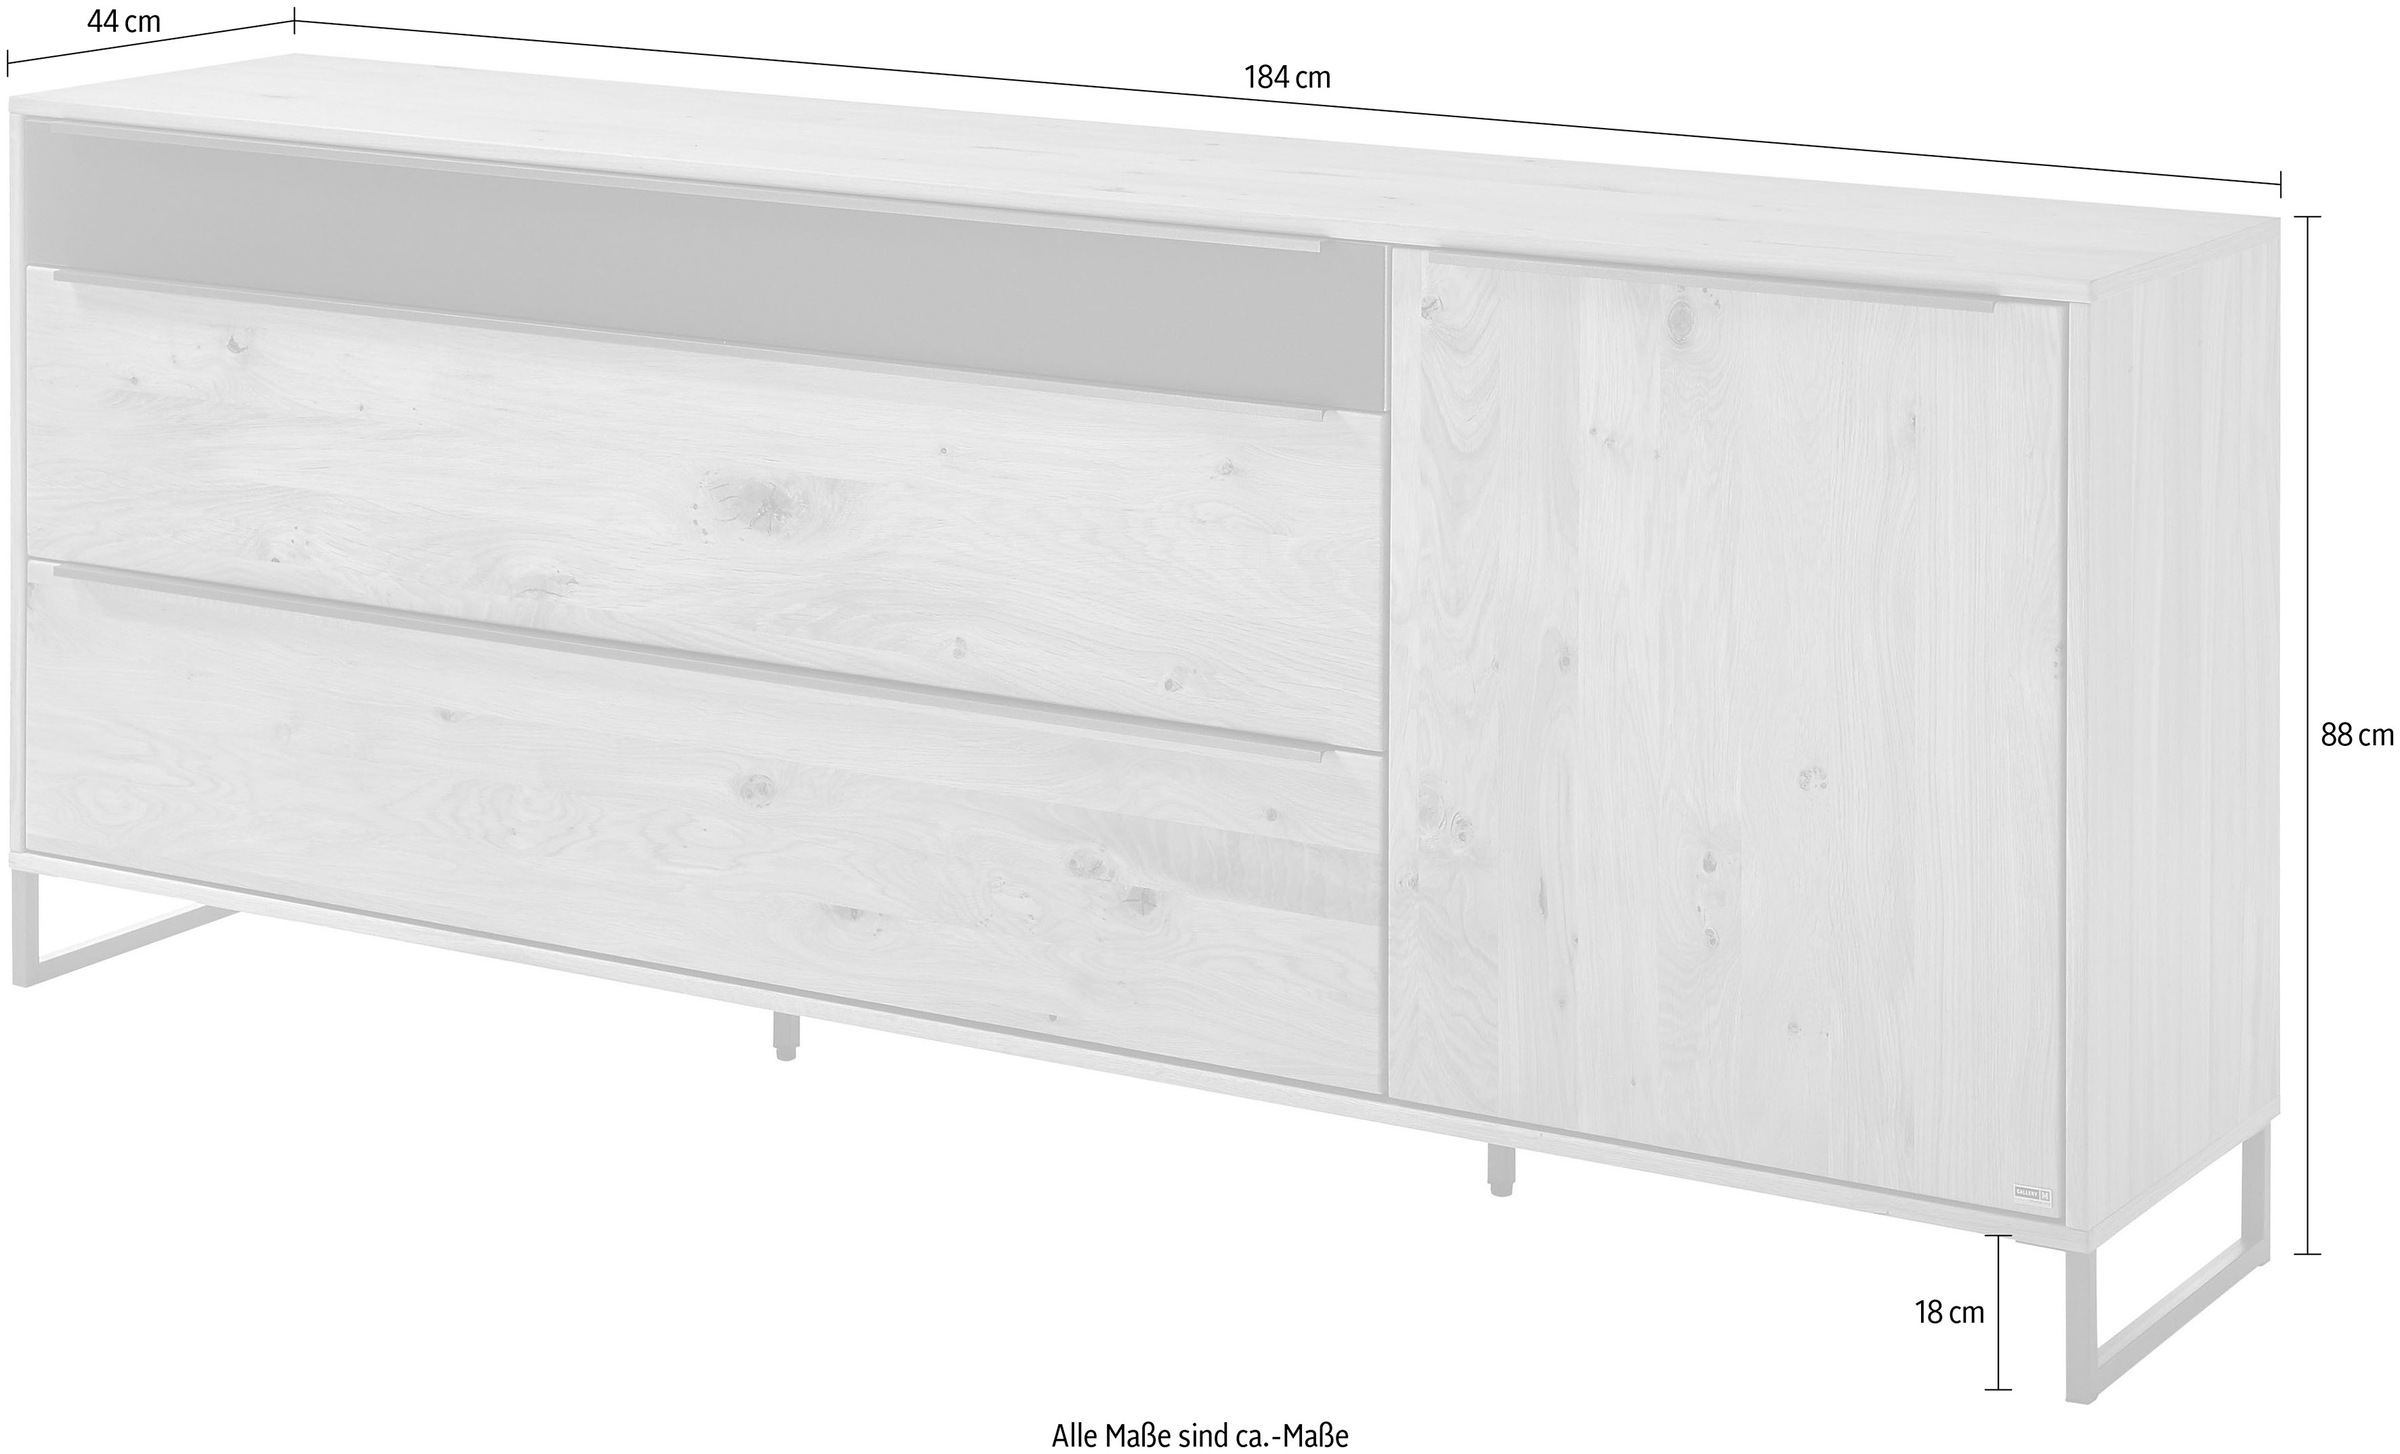 | geölt, Bainco Massiv Kufengestell in Eiche in GALLERY anthrazit M Front Musterring Sideboard »Alan«, by branded Metall BAUR